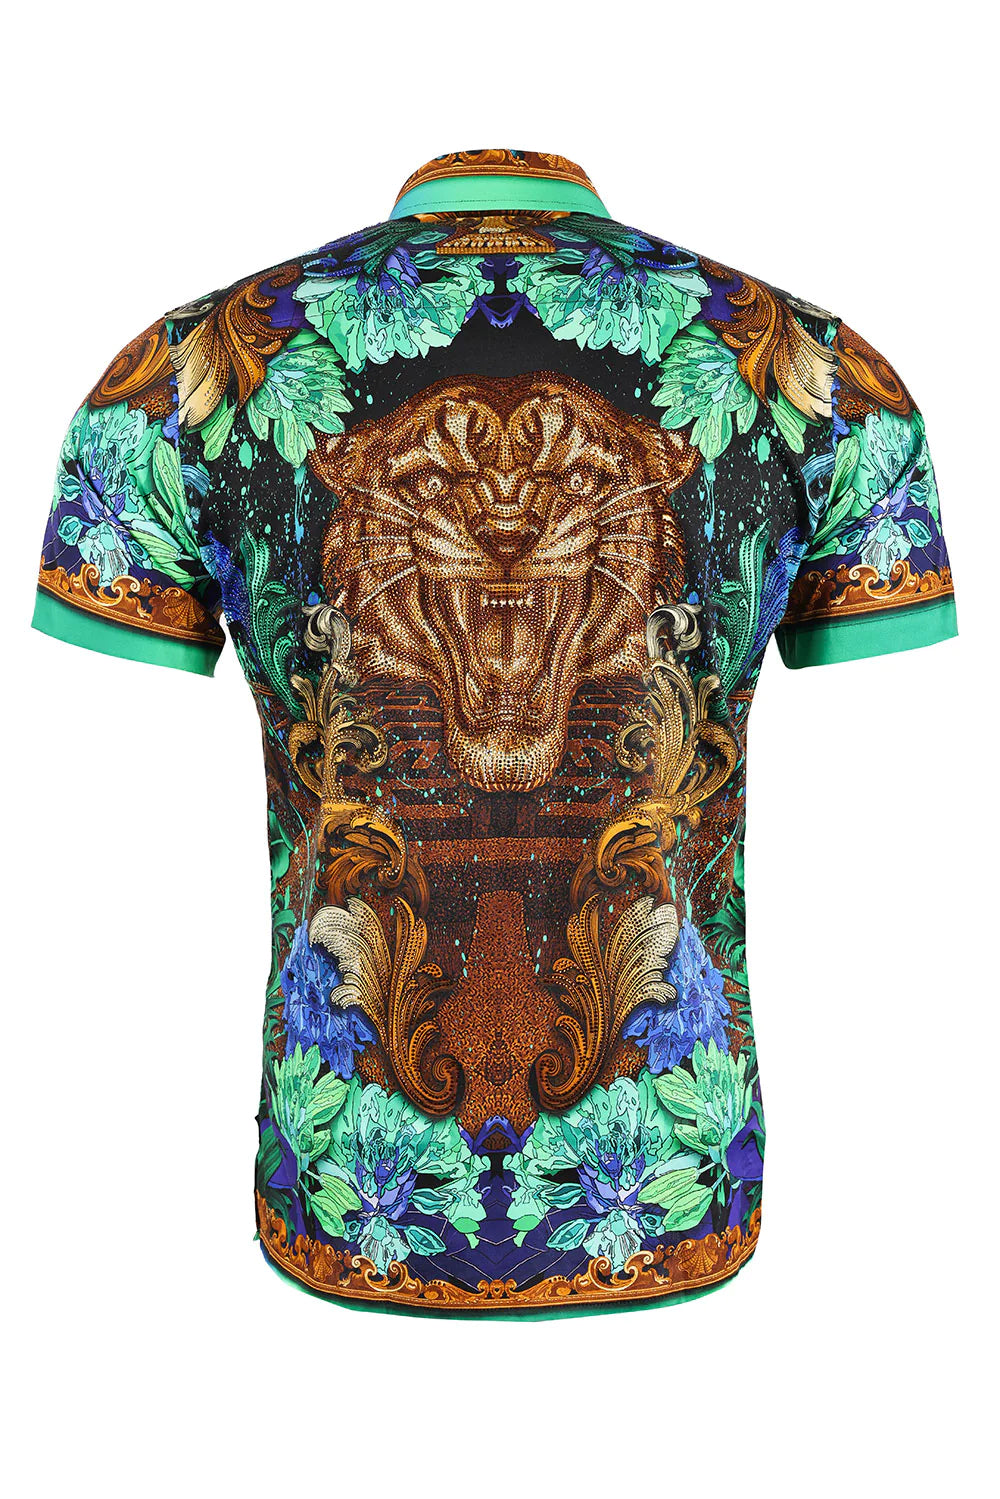 Tiger and Multi-Color Rhinestone Floral Short-Sleeve Button-Down Shirt